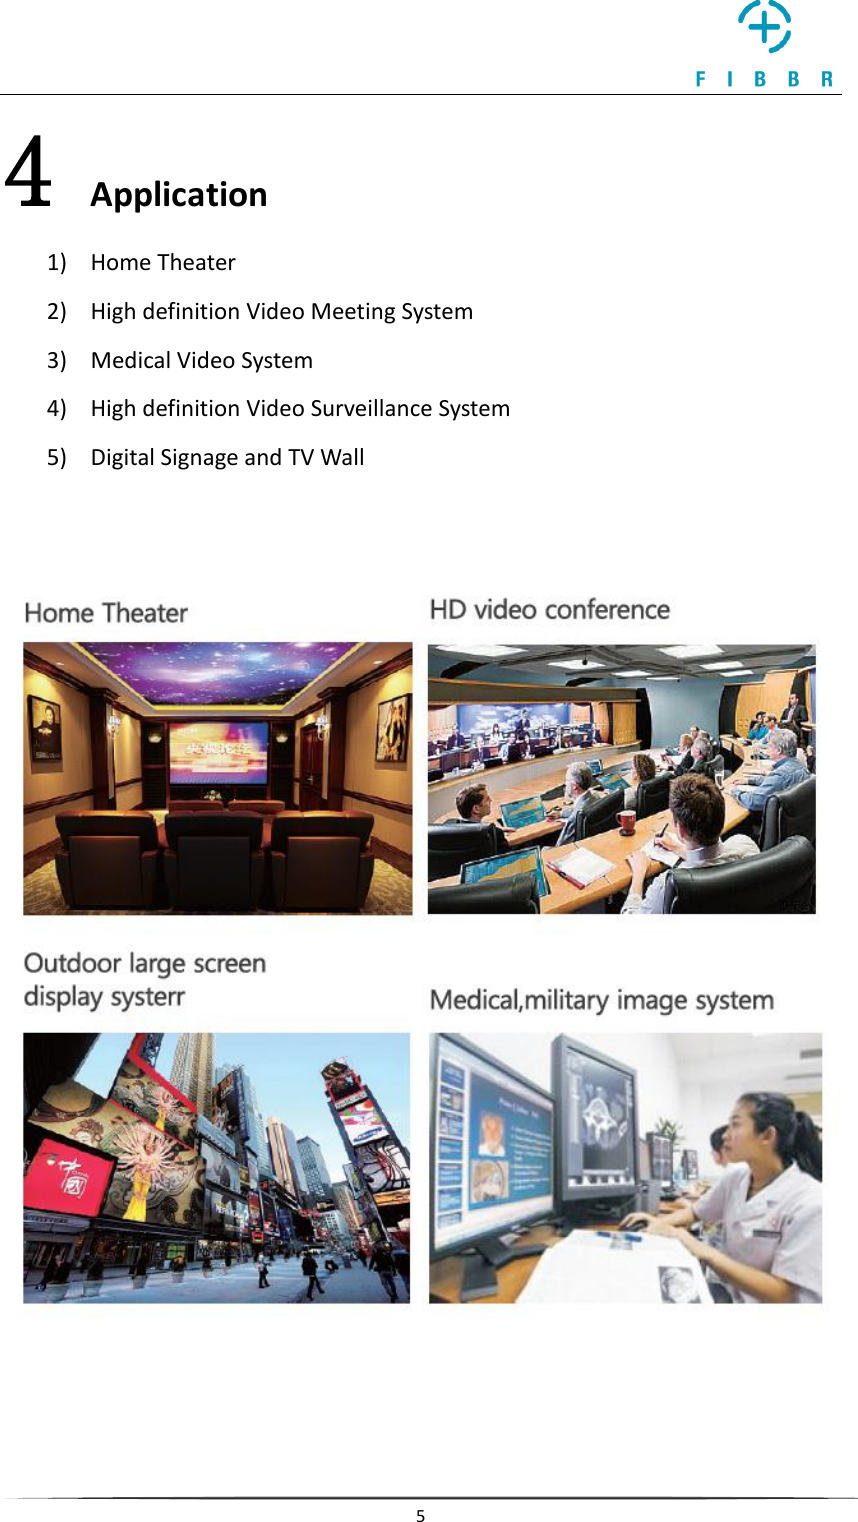     5  4 Application 1) Home Theater 2) High definition Video Meeting System 3) Medical Video System 4) High definition Video Surveillance System 5) Digital Signage and TV Wall       